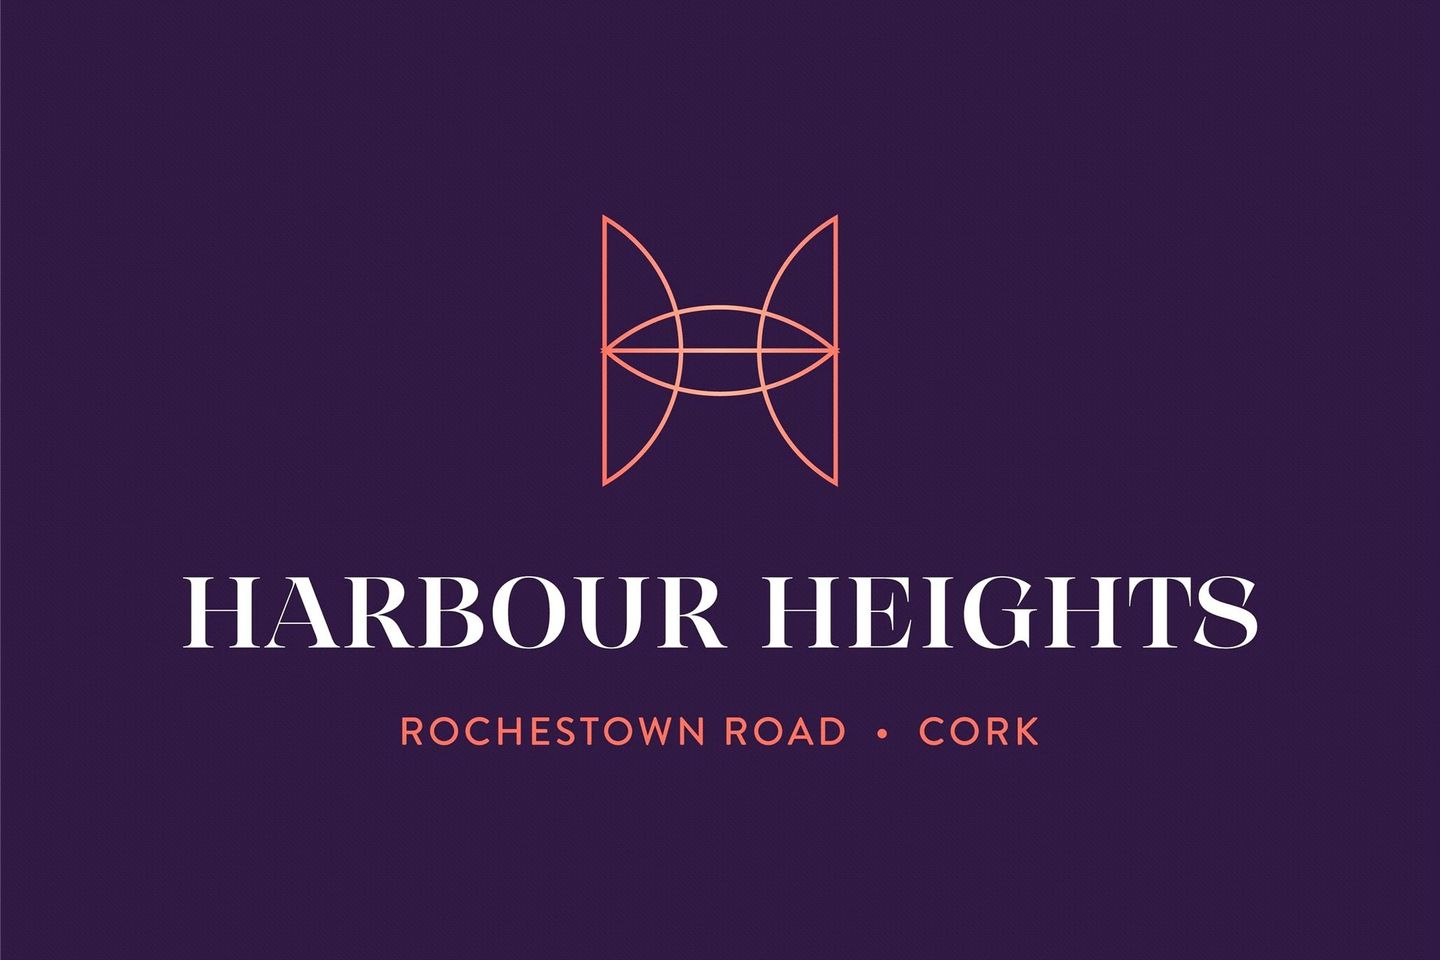 3 Bed Semi-Detached, Harbour Heights, 3 Bed Semi-Detached, Harbour Heights, Rochestown, Co. Cork